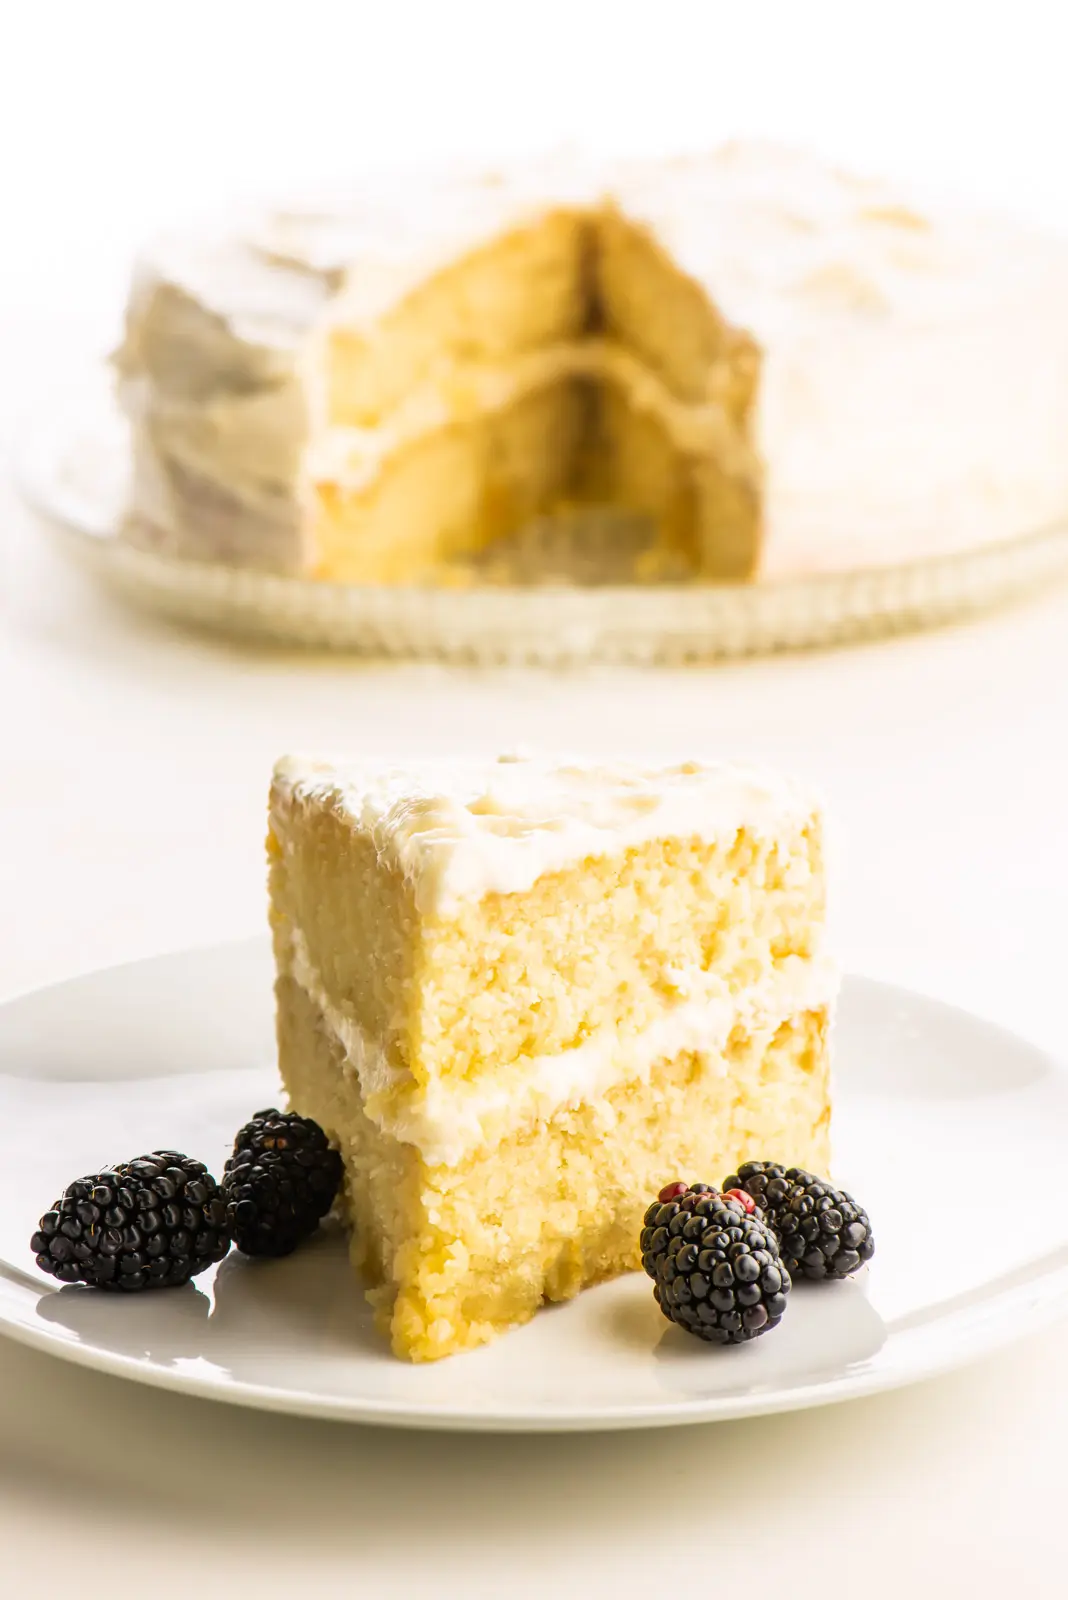 A slice of two-layer vegan vanilla cake with blackberries sitting next to it is in front of the rest of the cake.